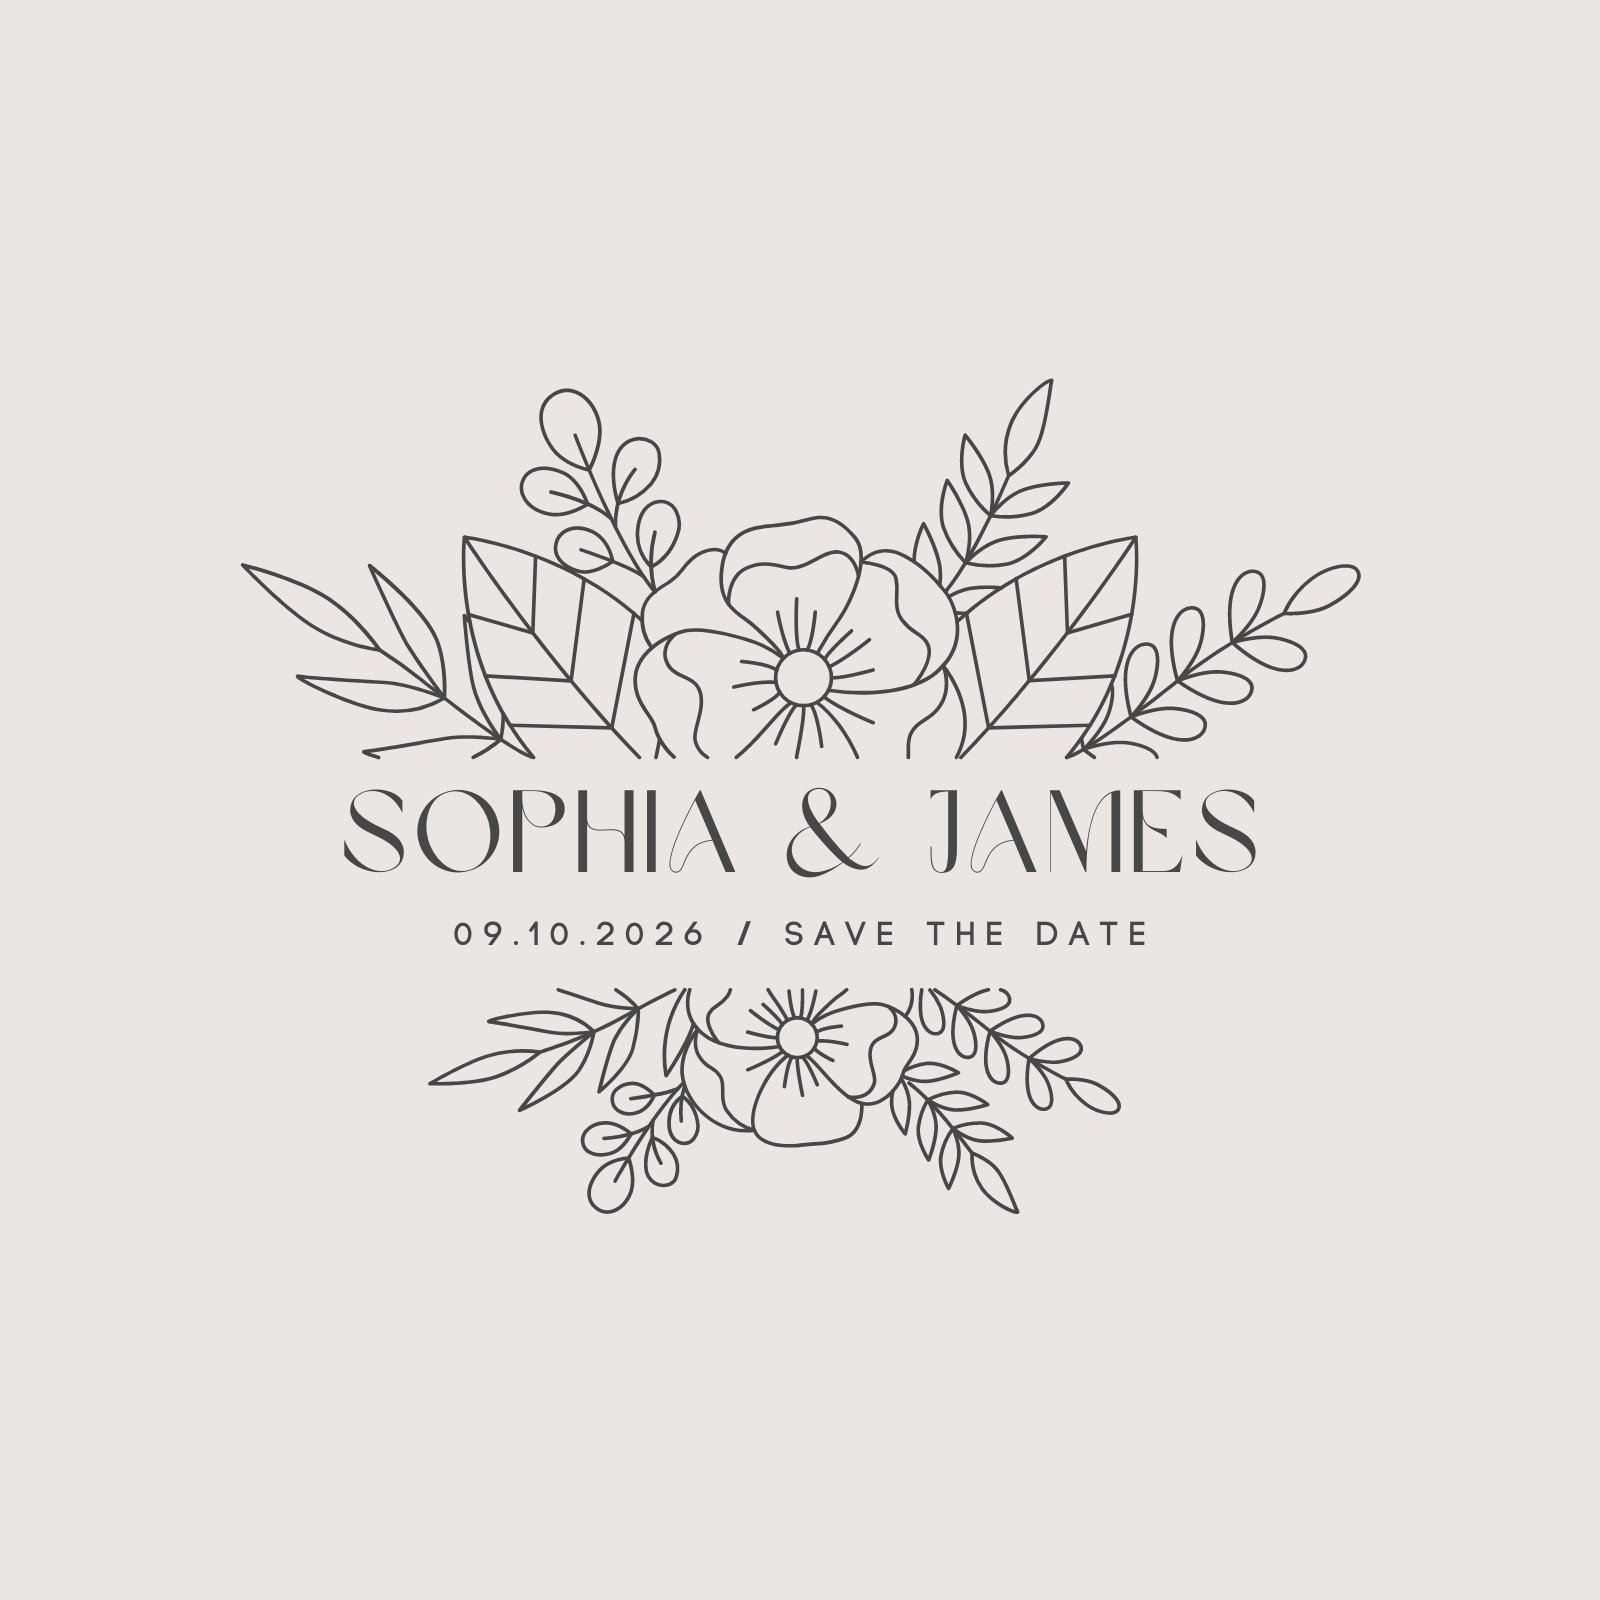 Design a custom wedding logo with your names and date by Originalbykris